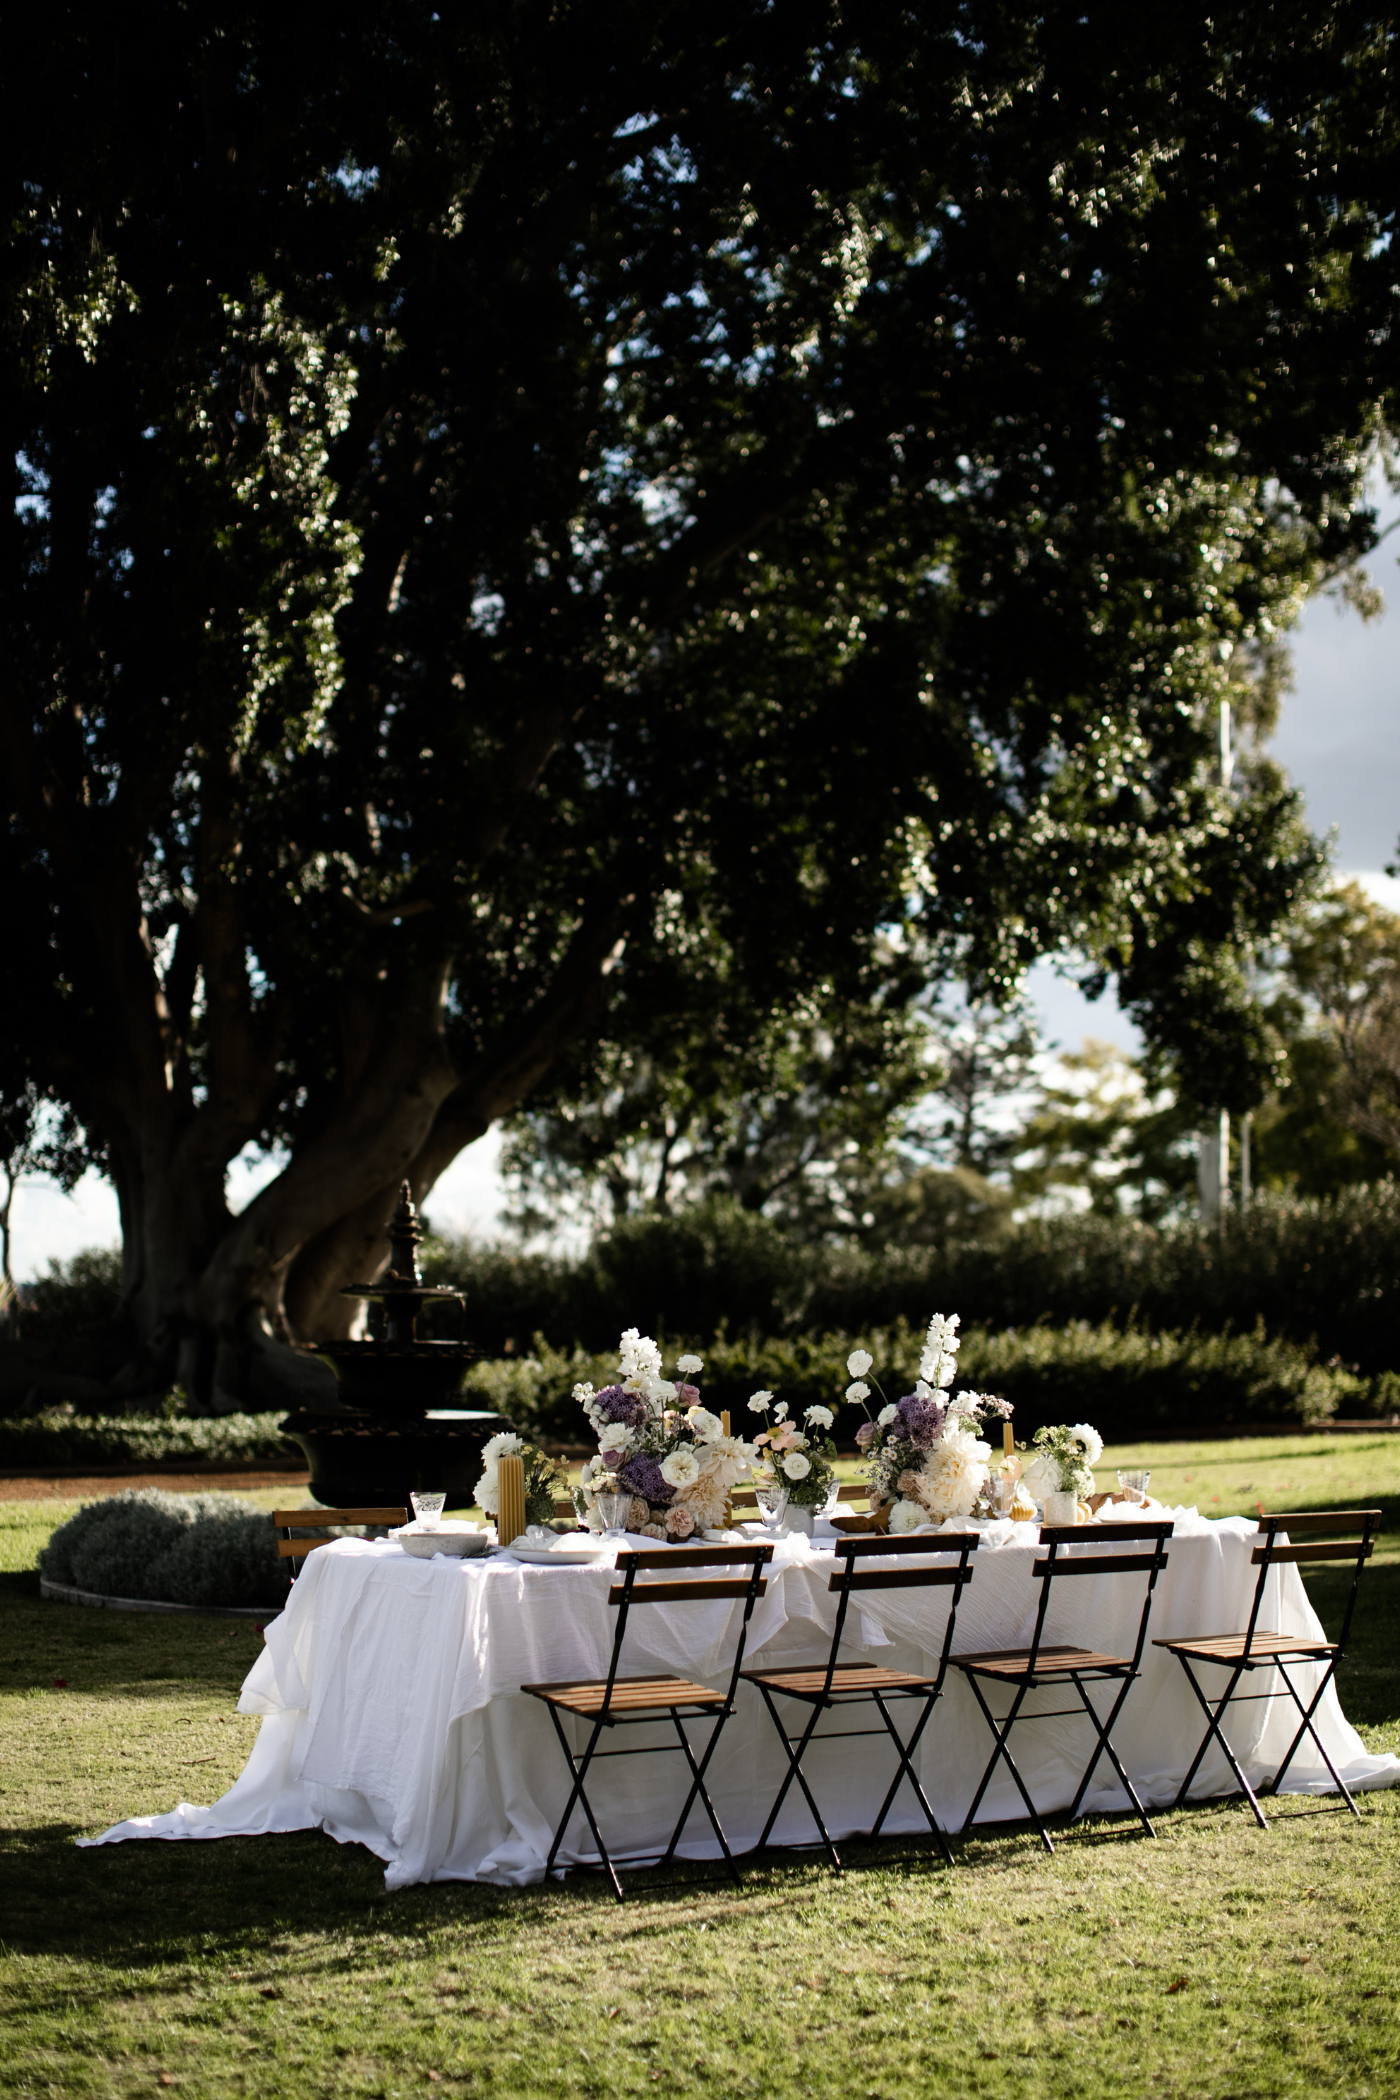 JIMBOUR HOUSE - A STYLED SHOOT